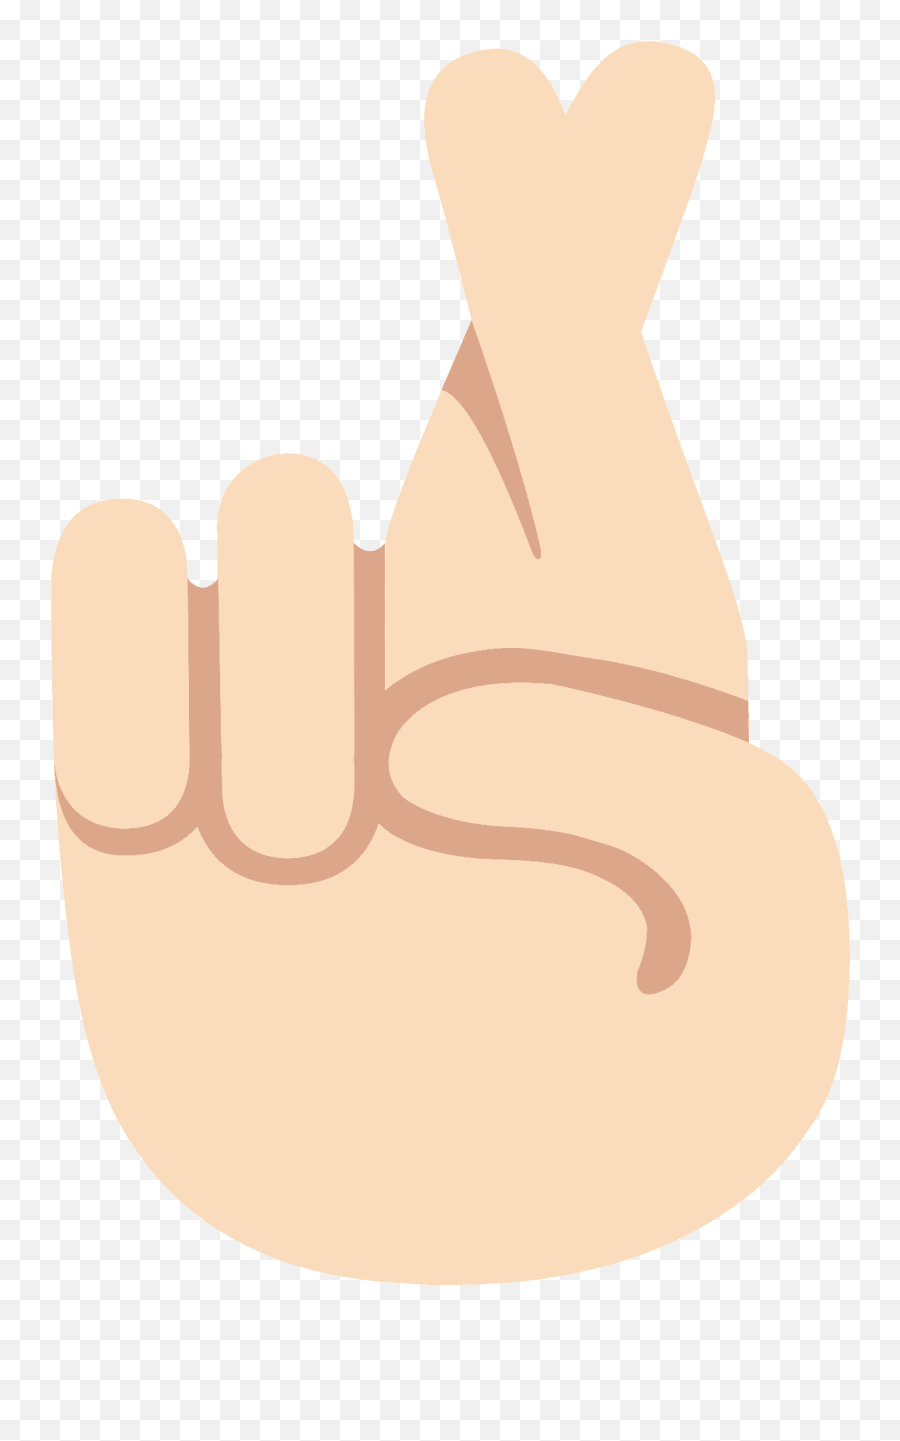 Crossed Fingers Emoji Clipart Free Download Transparent - Sign Language,Vulcan Salute Emoji For Android